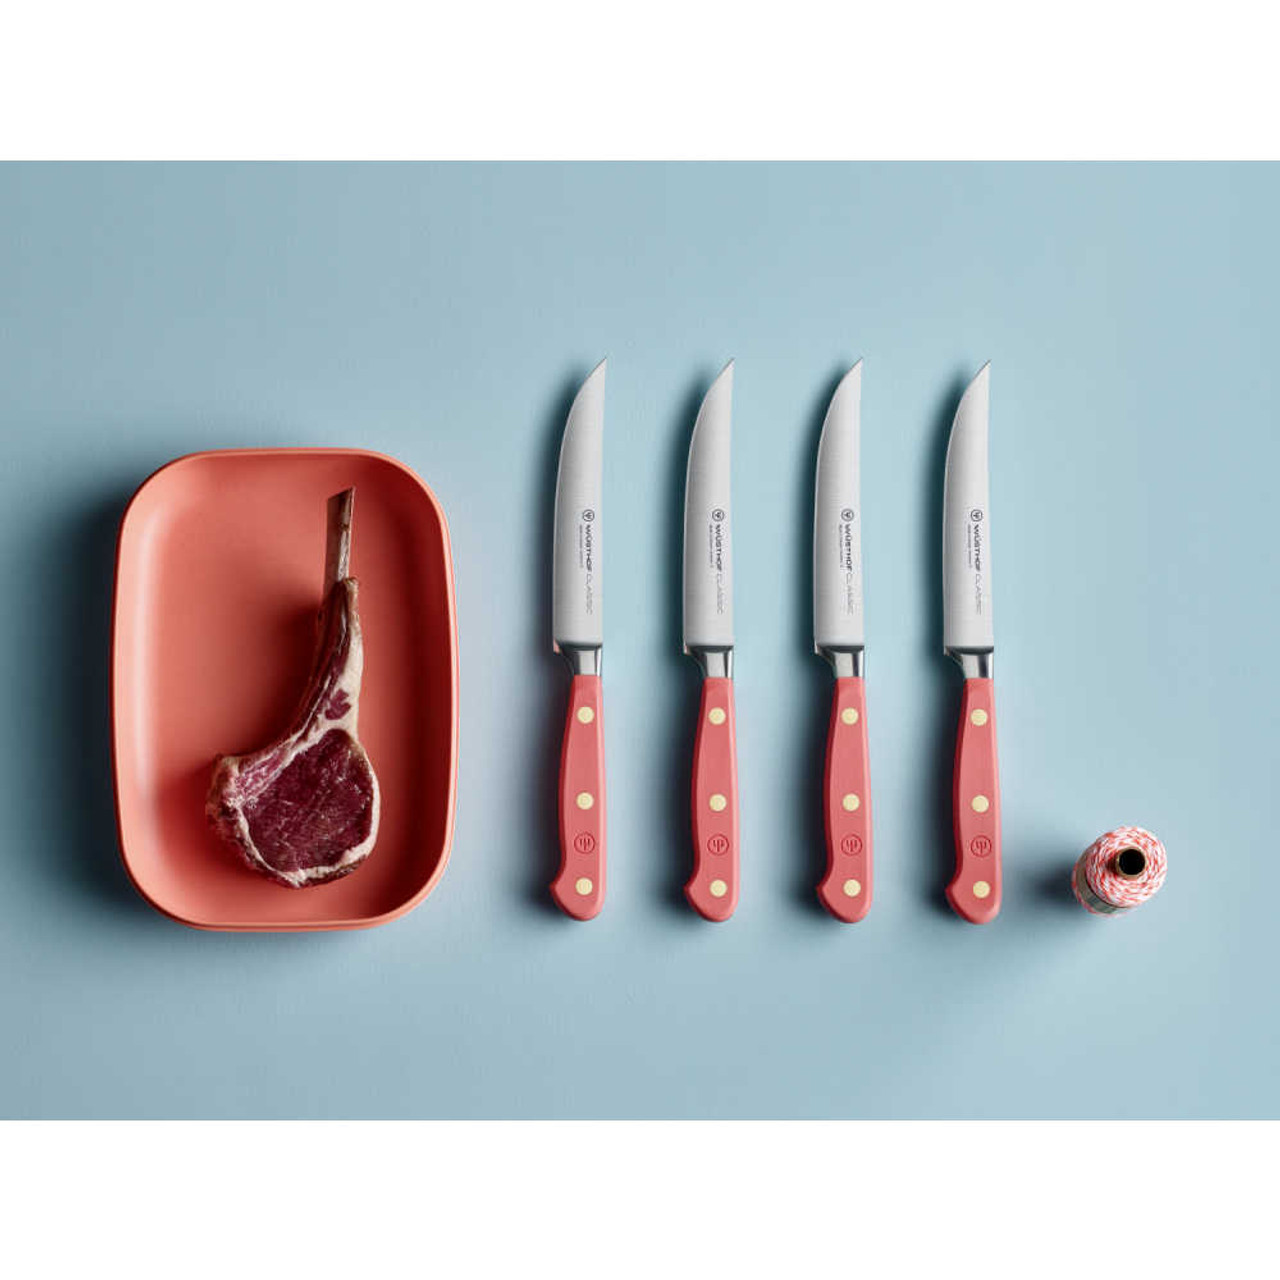 https://cdn11.bigcommerce.com/s-hccytny0od/images/stencil/1280x1280/products/5390/23456/Wusthof_Classic_Color_4-Piece_Steak_Knife_Set_Coral_Peach_1__12946.1682091981.jpg?c=2?imbypass=on